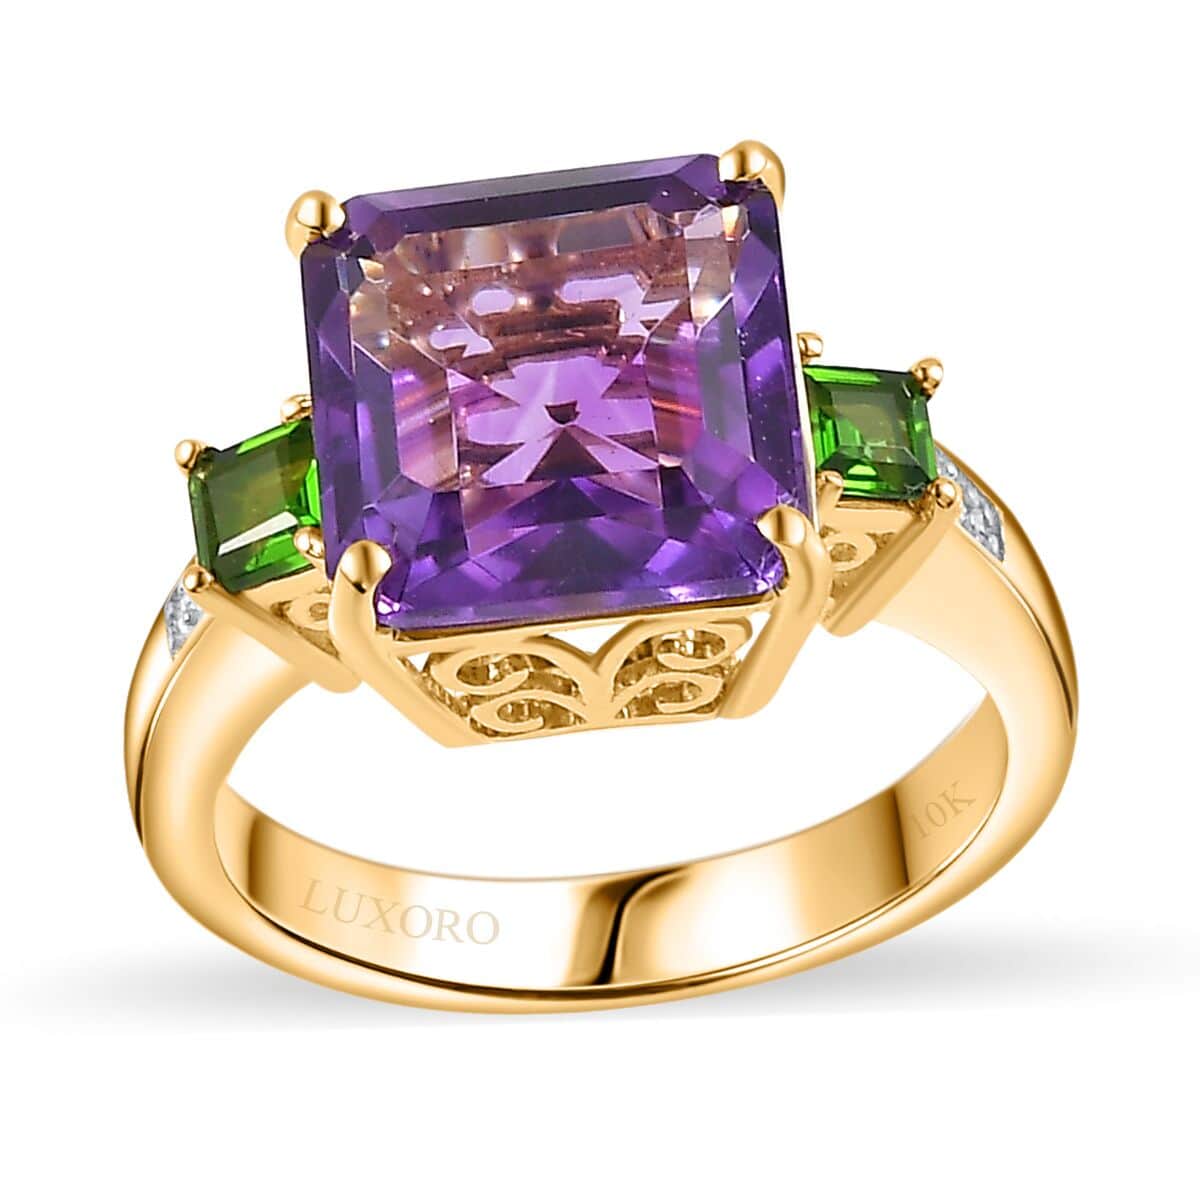 Luxoro 10K Yellow Gold Premium Moroccan Amethyst, Chrome Diopside and G-H I2 Diamond Accent Ring (Size 9.0) 4.15 Grams 4.90 ctw image number 0